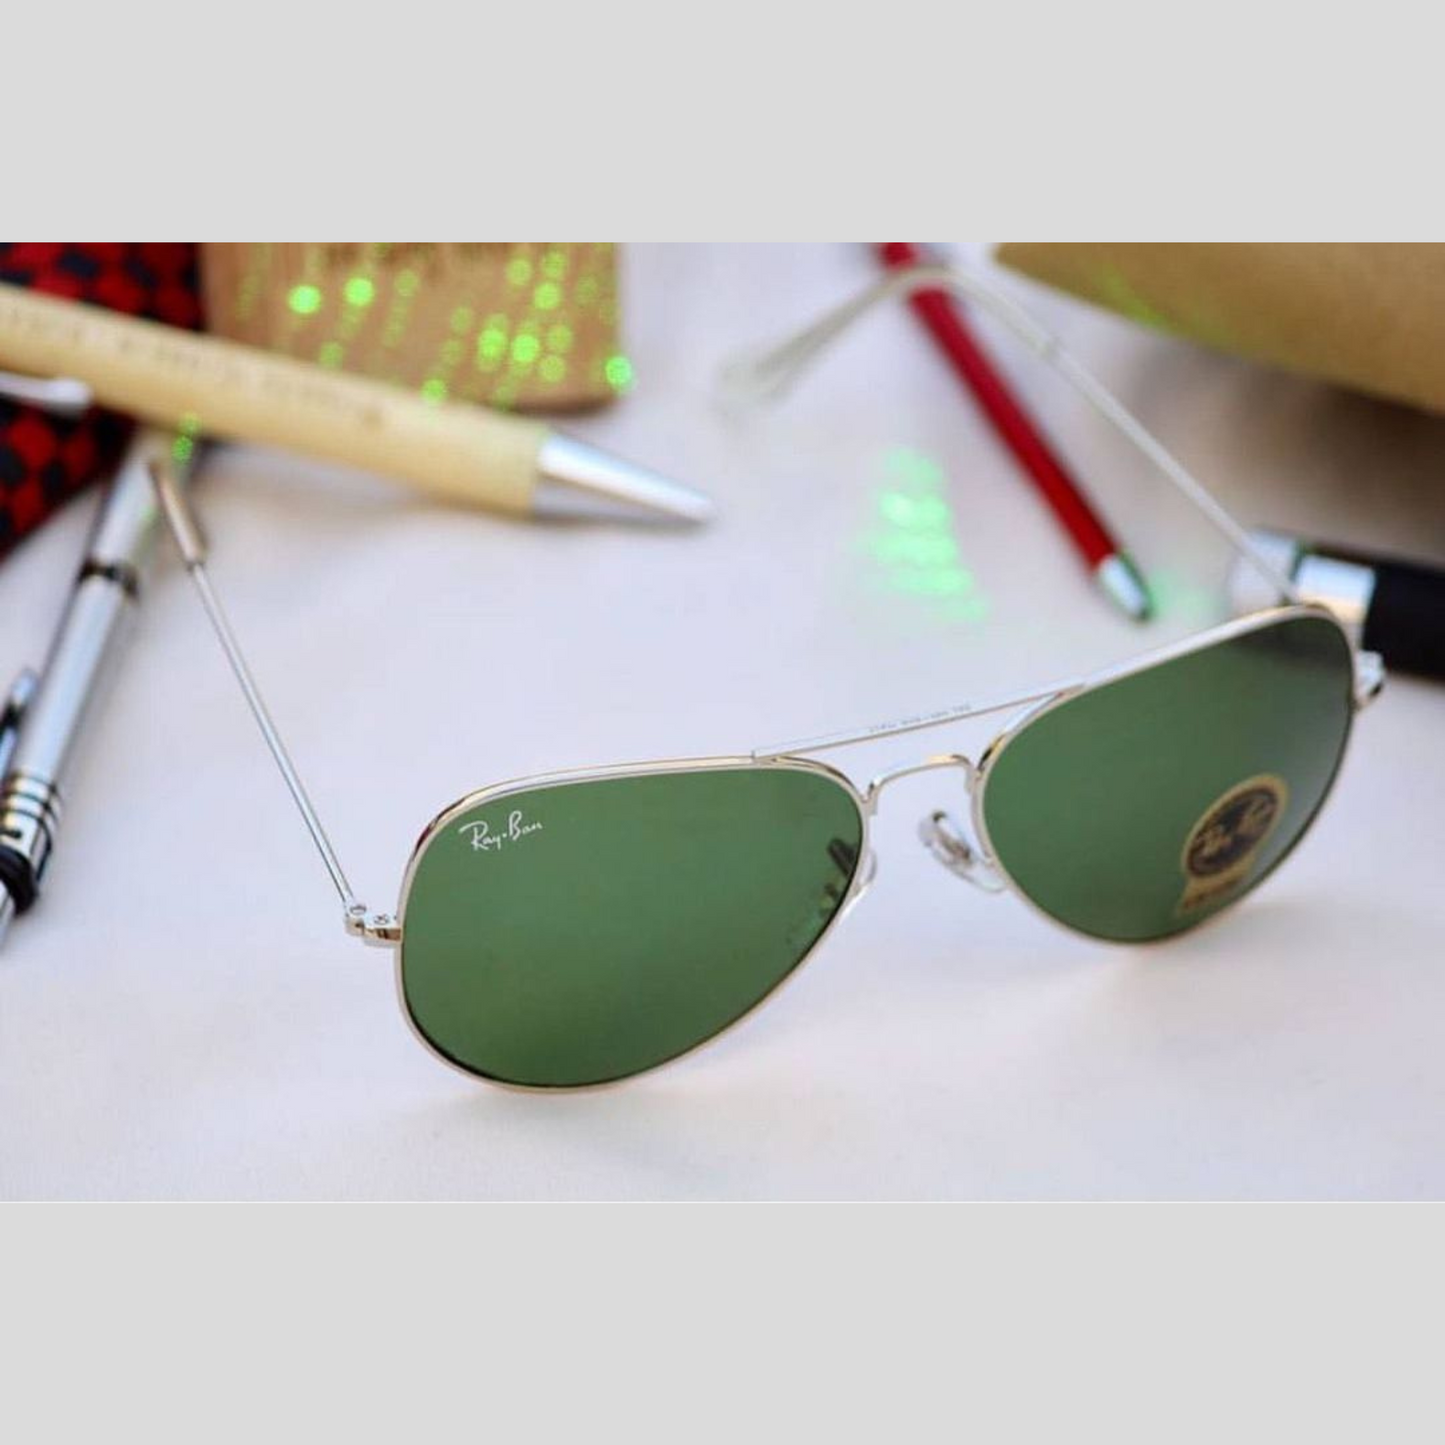 All Season Special Men Women 7A Quality B2 3026 Aviator Causal Vintage Sunglasses For Unisex. ( A1-3025/26 Mm )